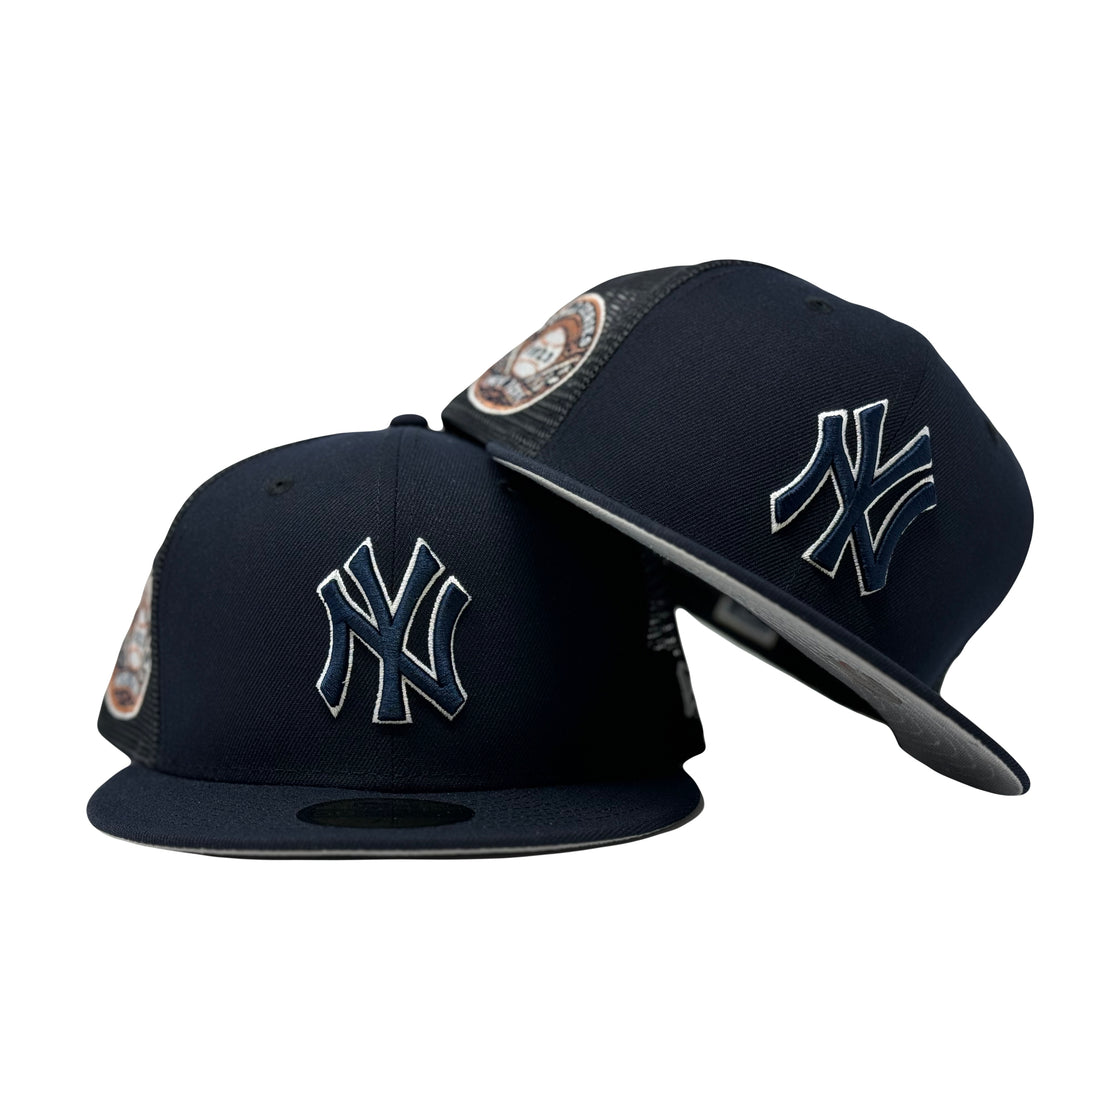 New York Yankees 1923 World Series Navy Blue 5950 New Era Fitted Hat